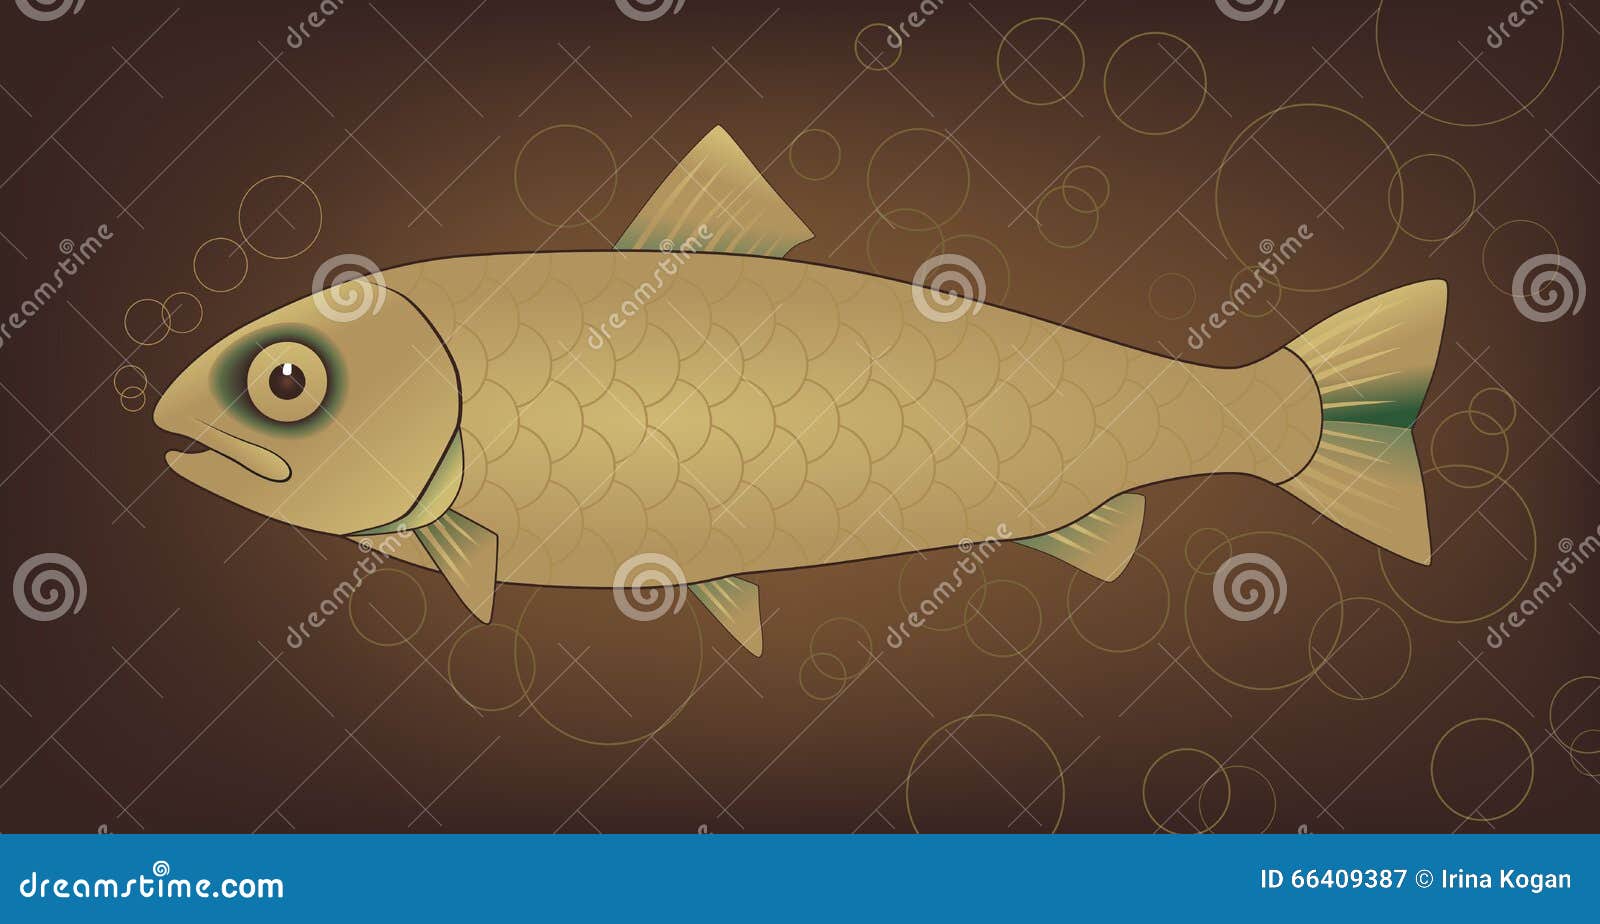 Download Vector Fish With Bubbles Stock Vector - Image: 66409387